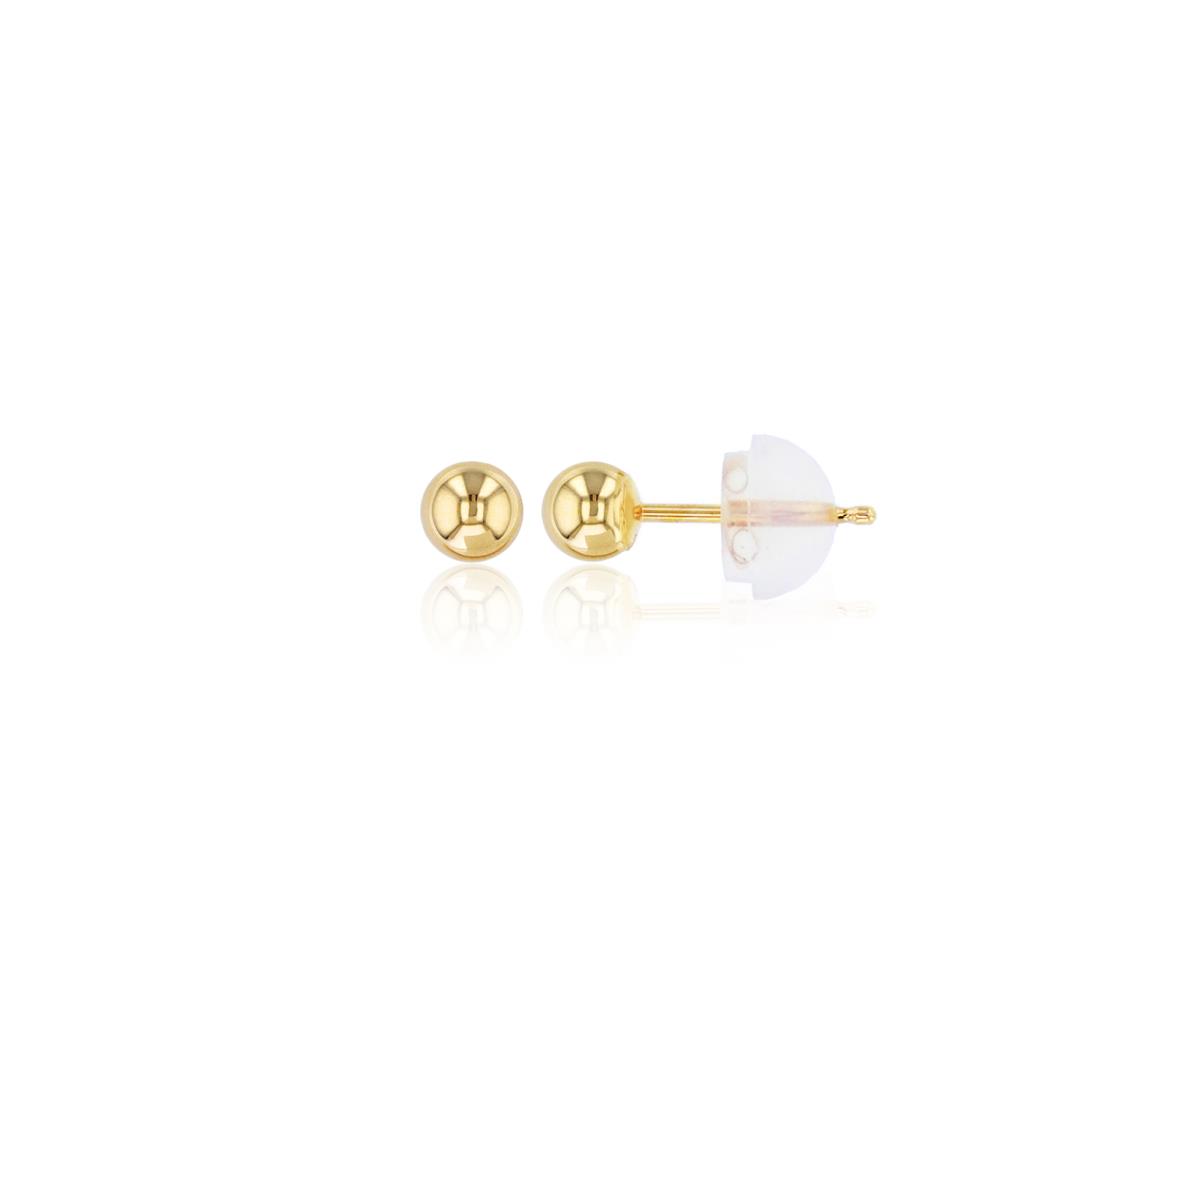 10K Yellow Gold 4mm HP Ball Post Stud Earring with Gold Silicone Backs